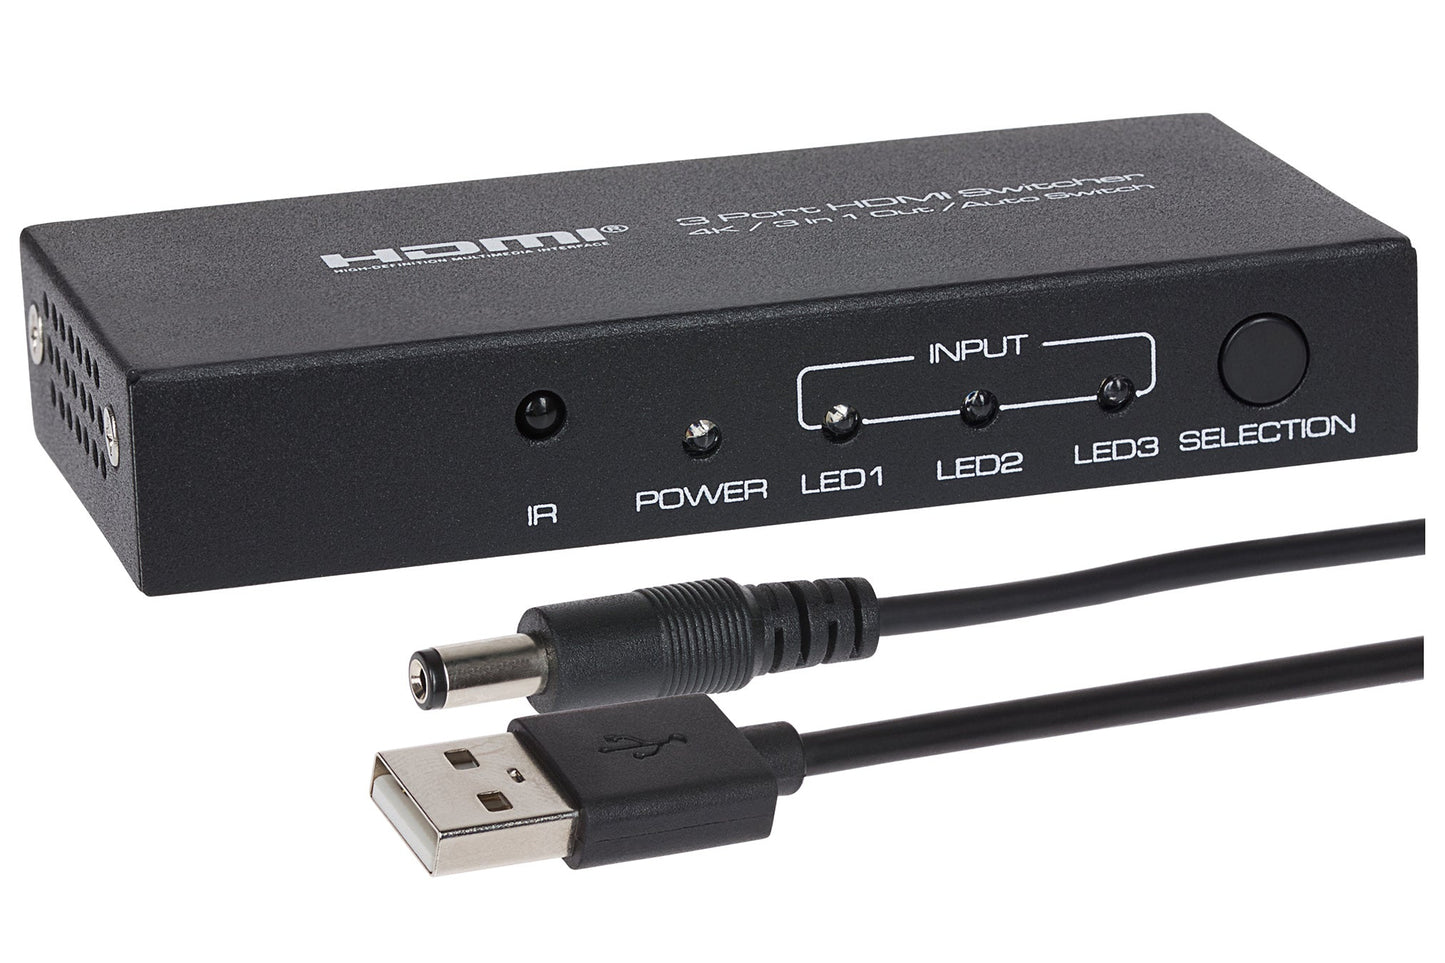 Maplin MPS HDMI Switch 3 Ports In 1 Port Out 4K Ultra HD @30Hz with Remote Control - Black - maplin.co.uk